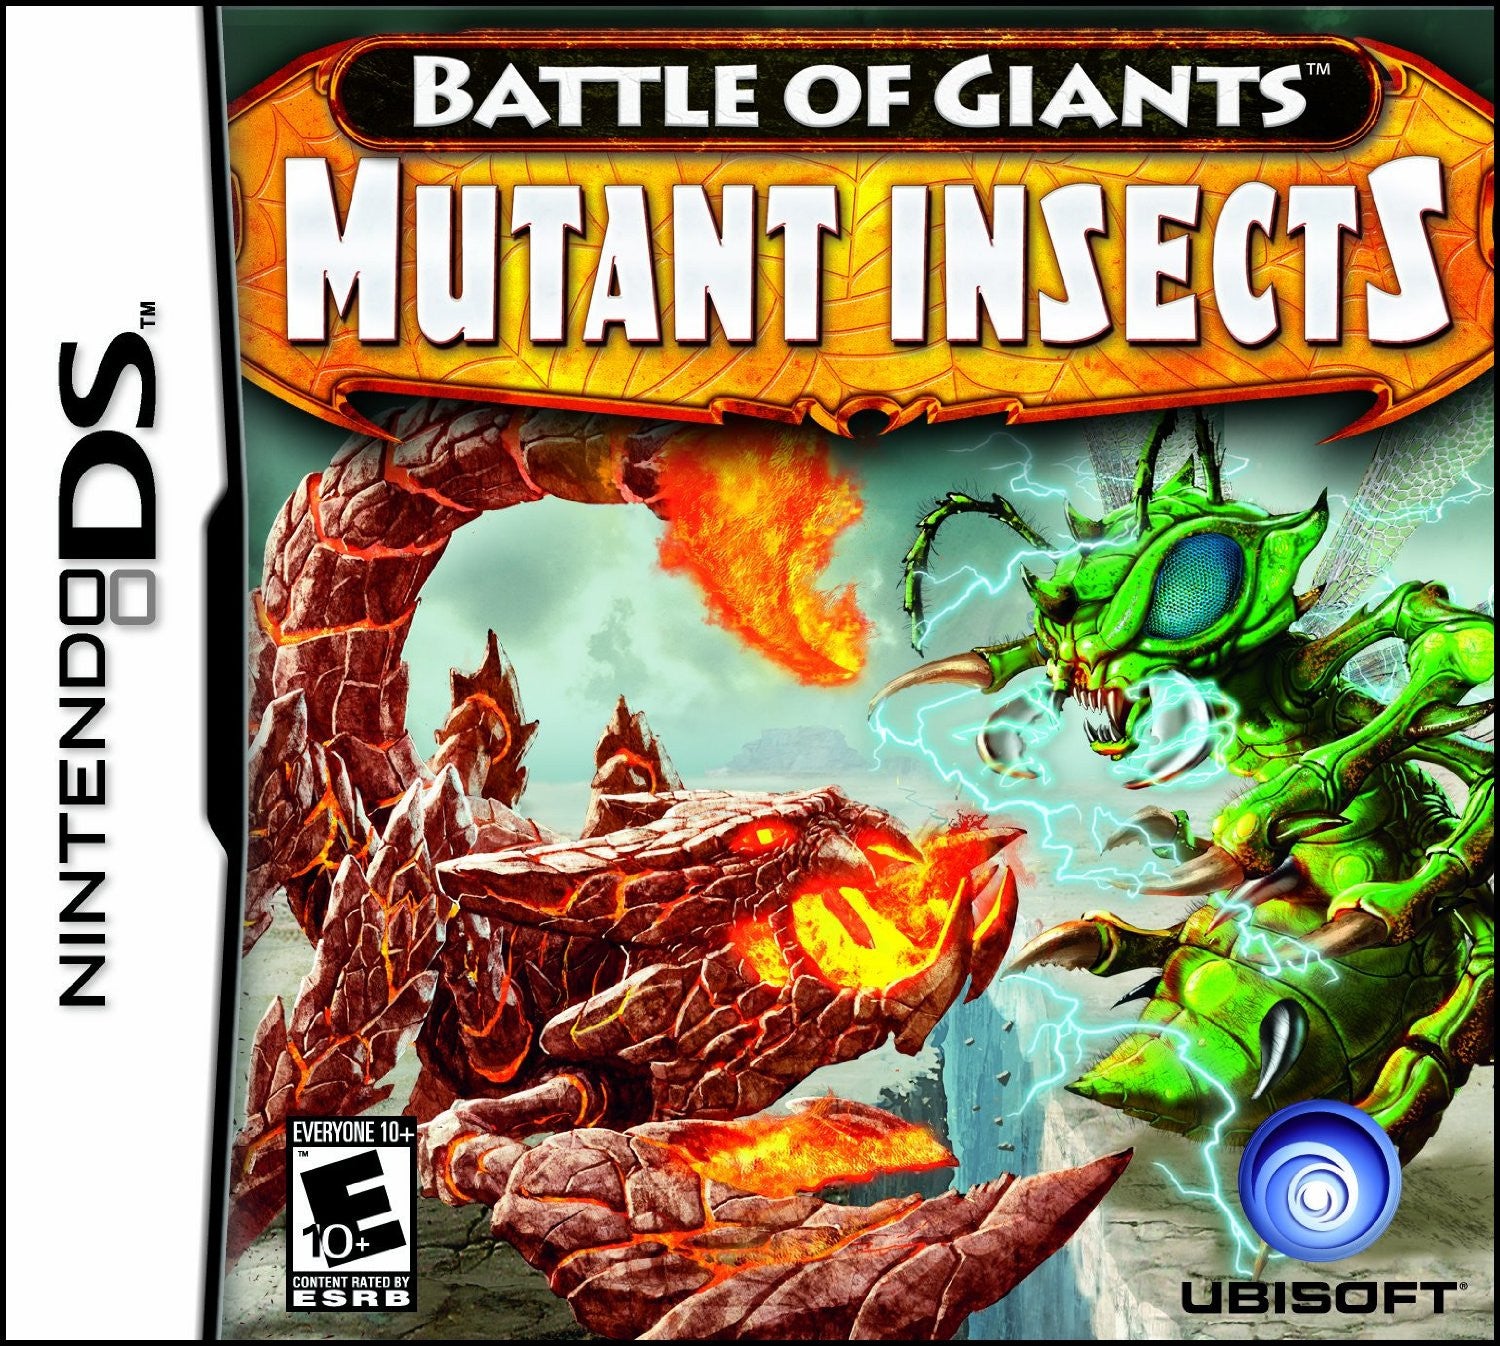 Battle of Giants: Mutant Insects